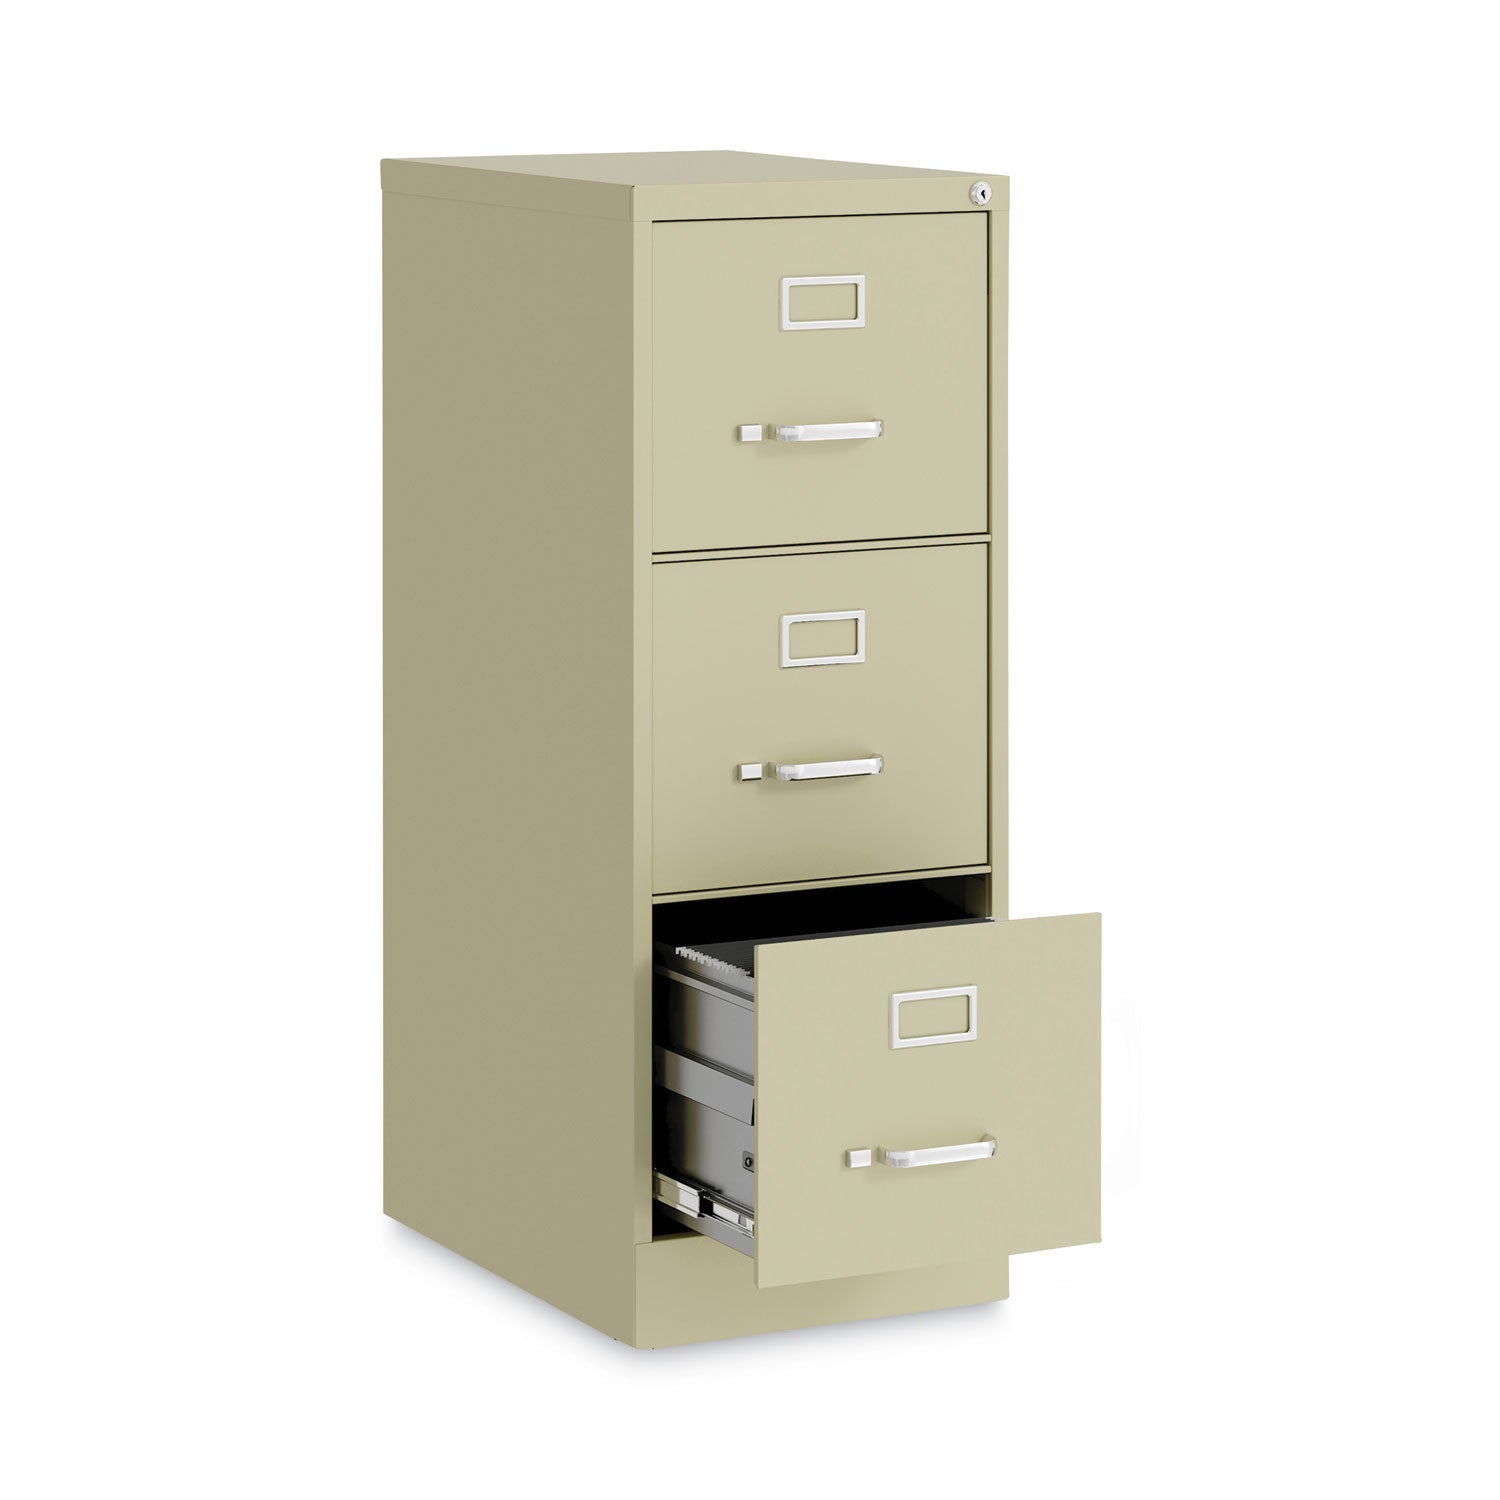 vertical-letter-file-cabinet-3-letter-size-file-drawers-putty-15-x-22-x-4019_hid24855 - 2